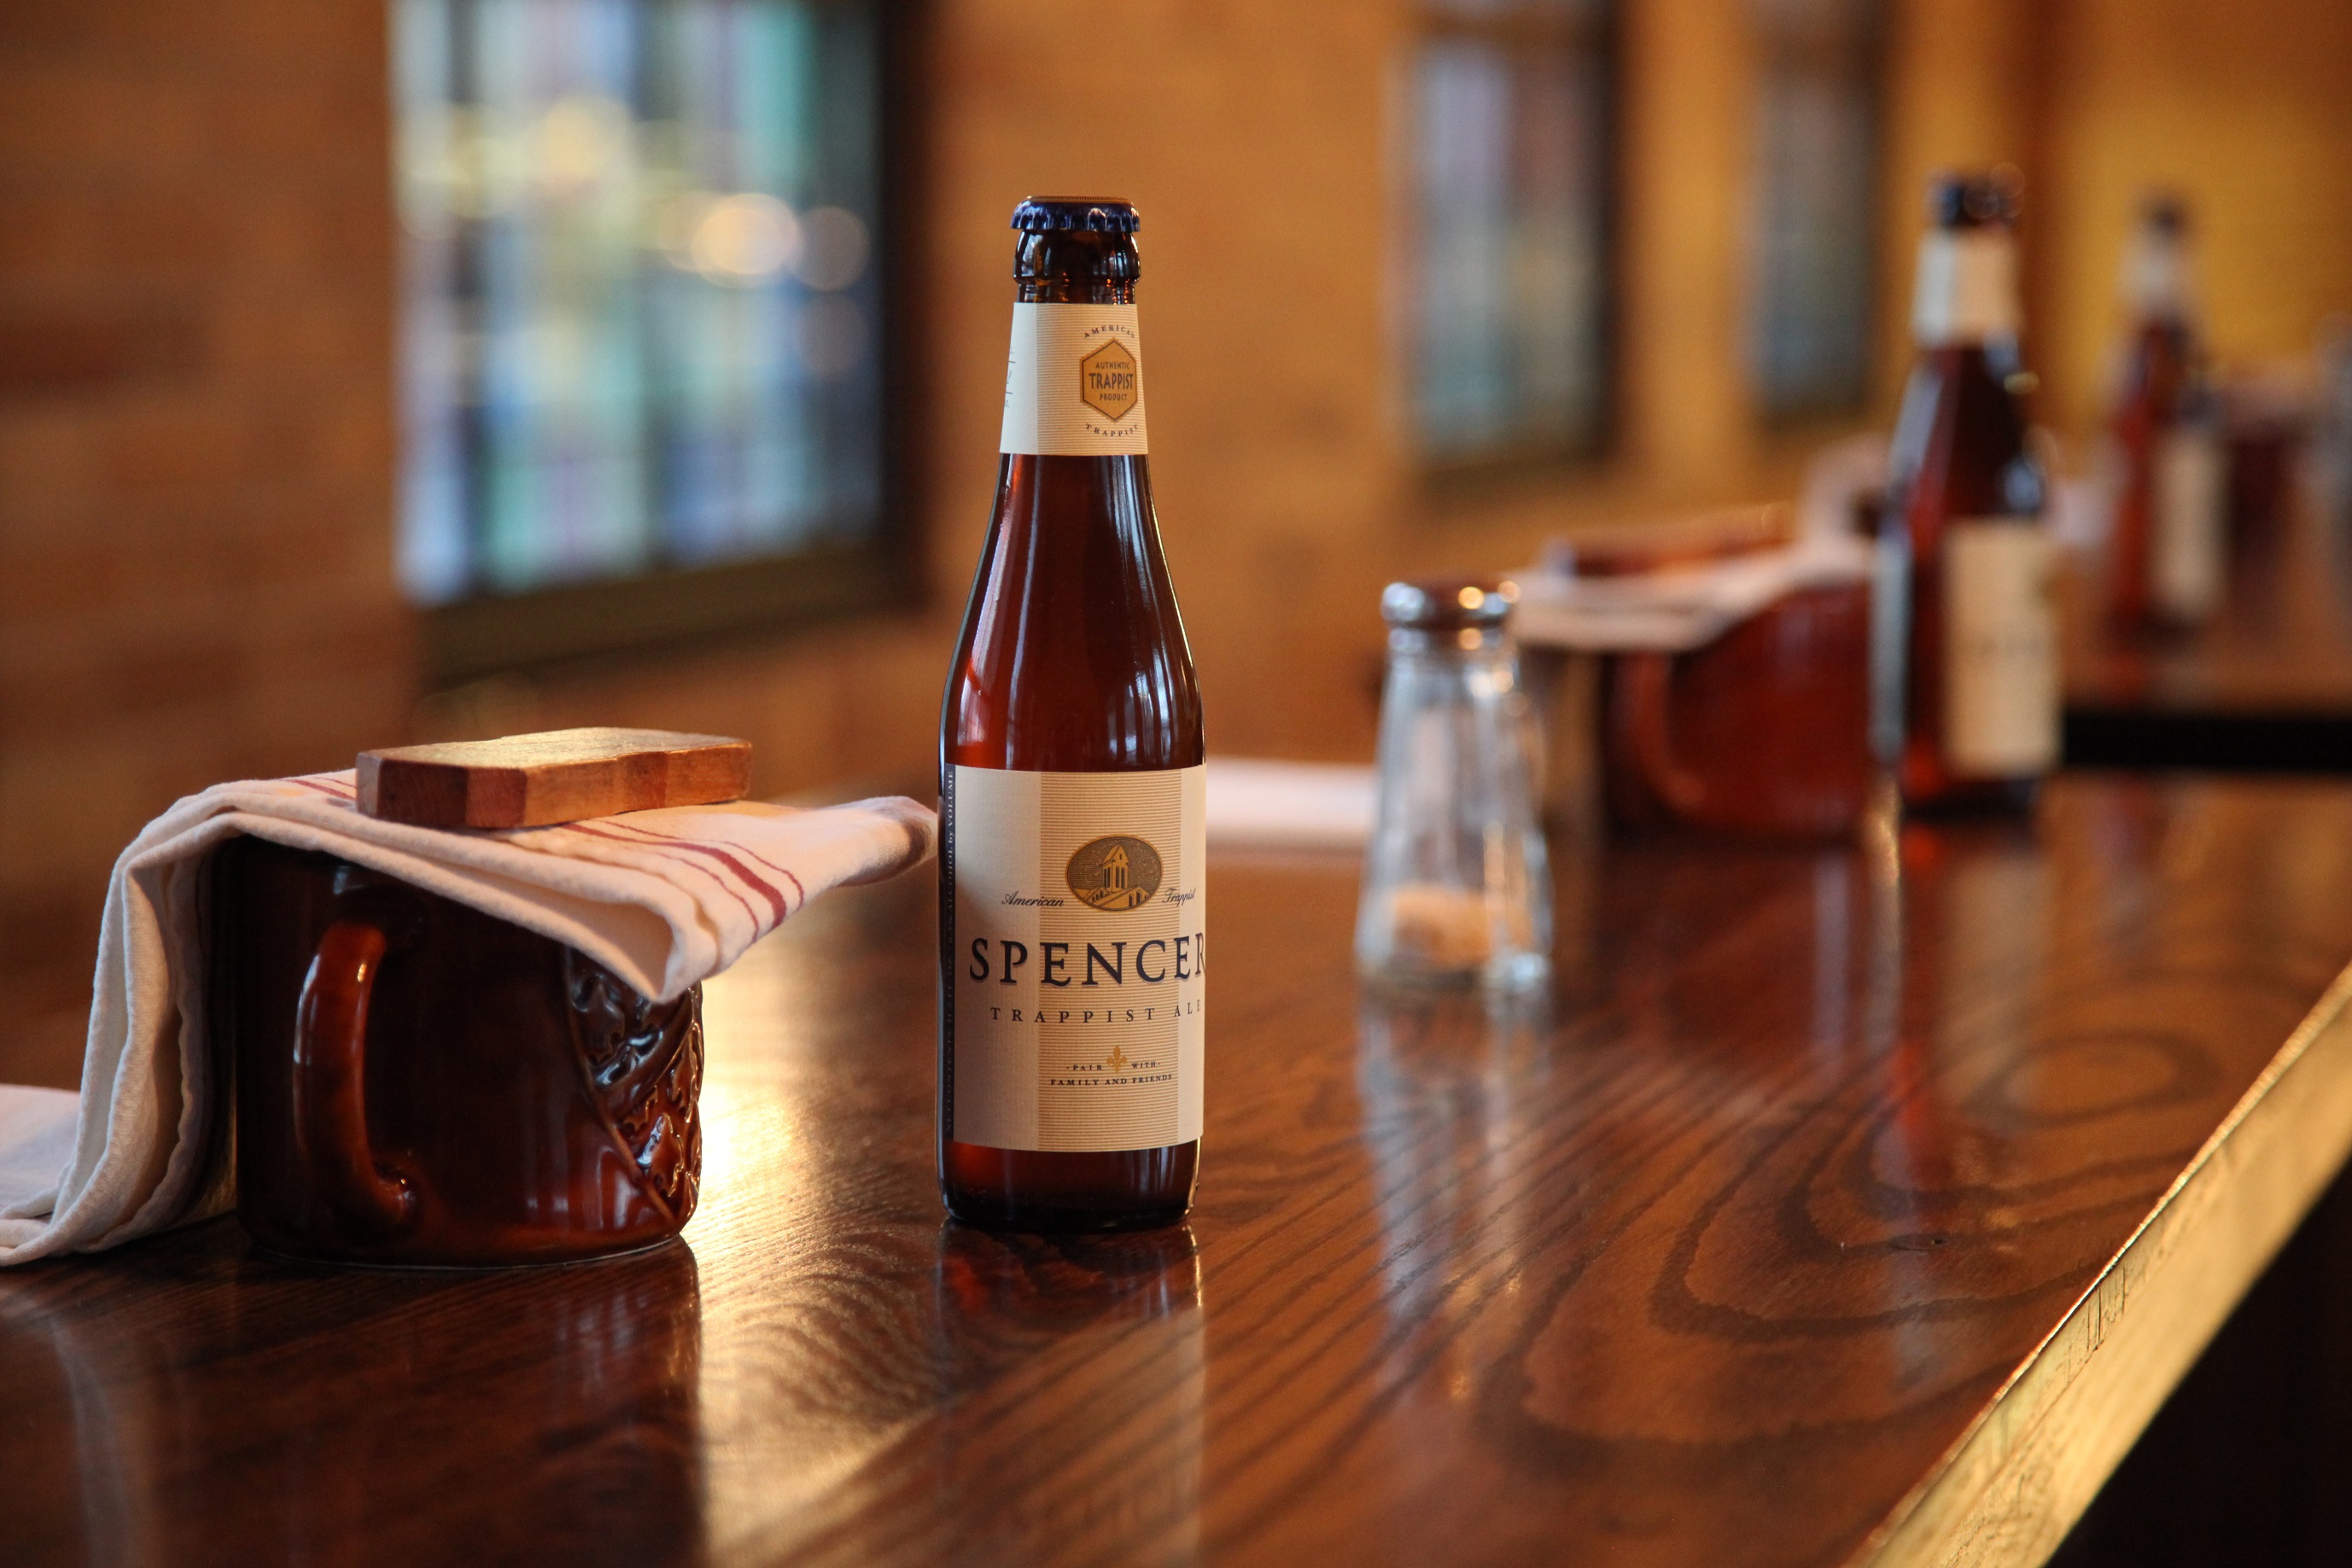 Concealed Wines launches Spencer Trappist Ale in the exclusive assortment at Systembolaget